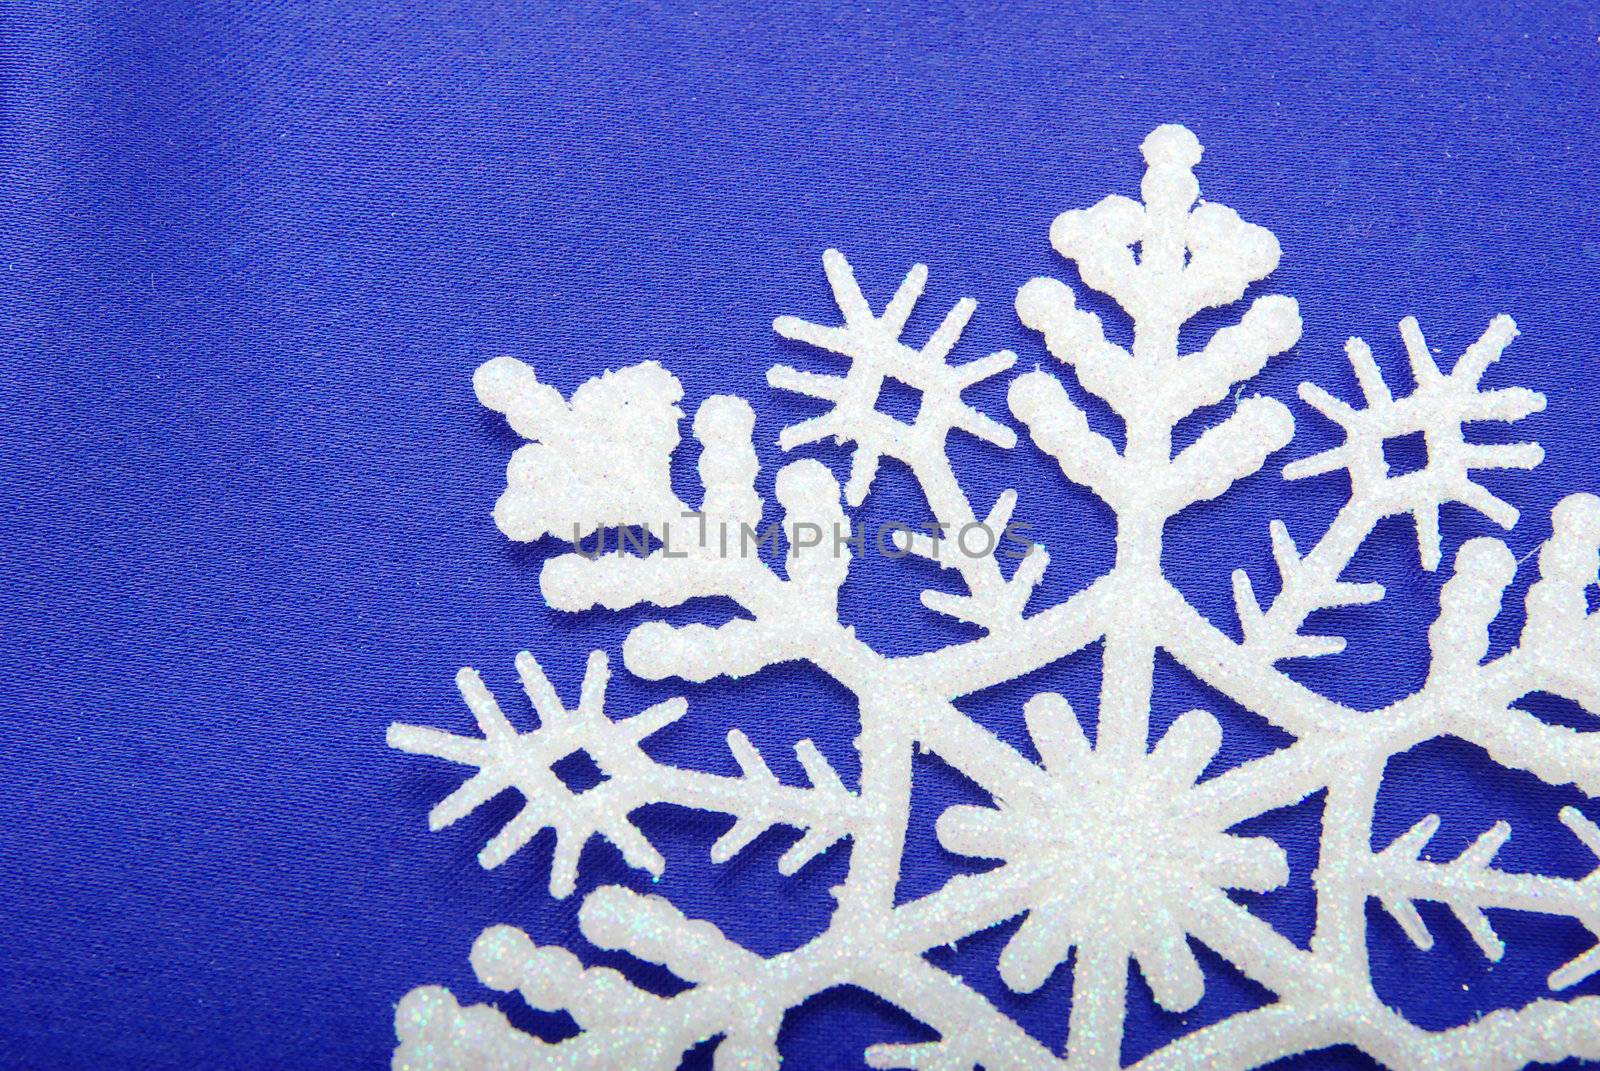 snowflakes isolated on blue background